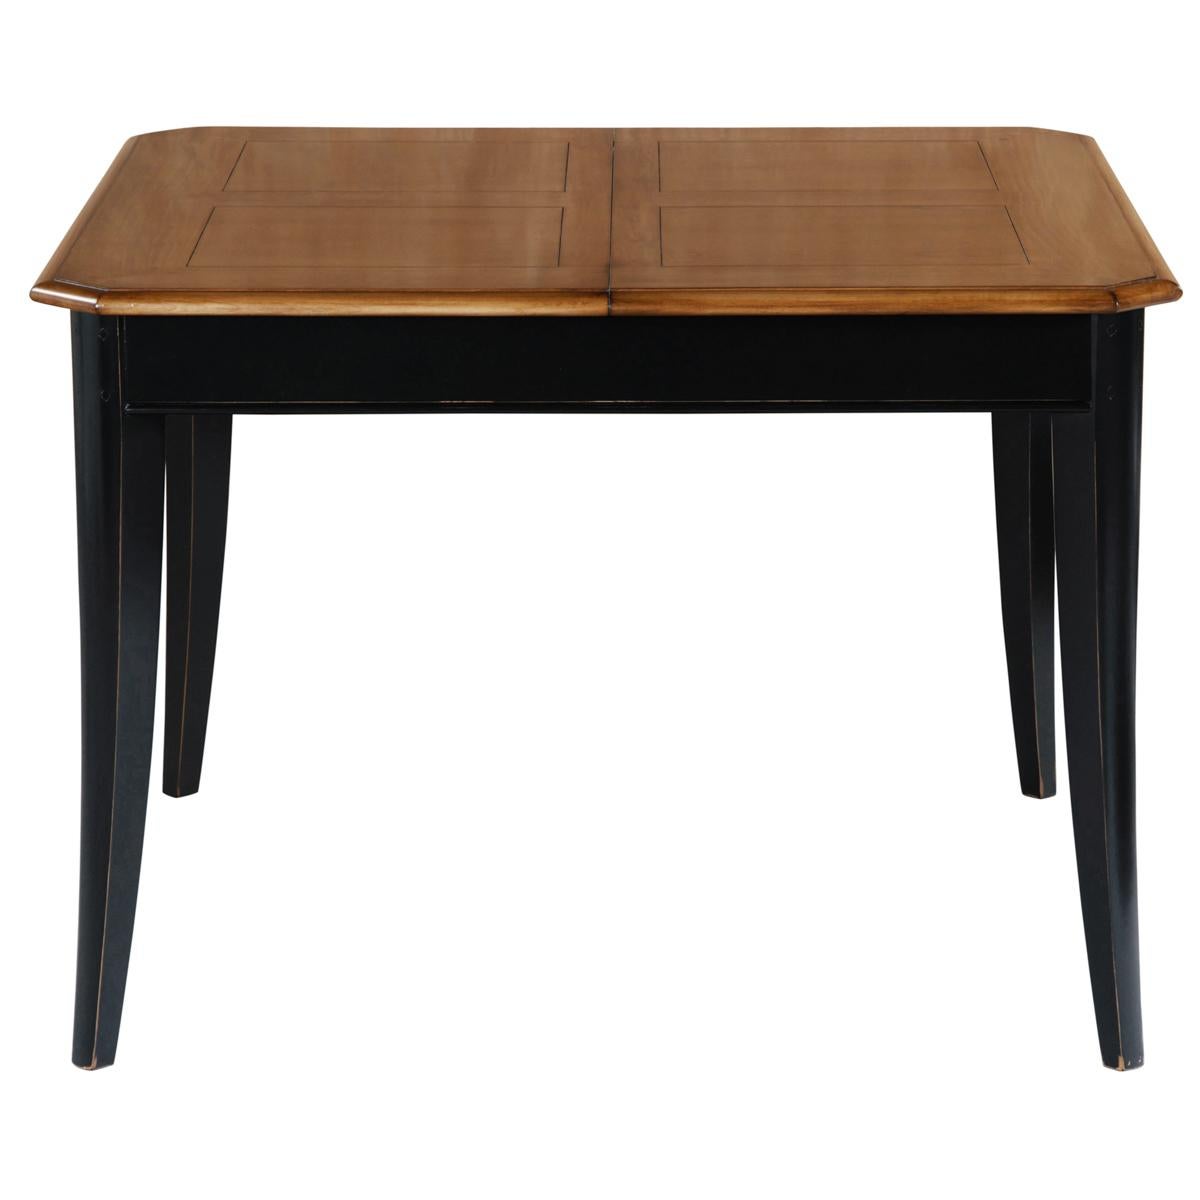 Wood French Tradition Extensible Square Dining Table, Smoked Cherry & Black Laquered For Sale